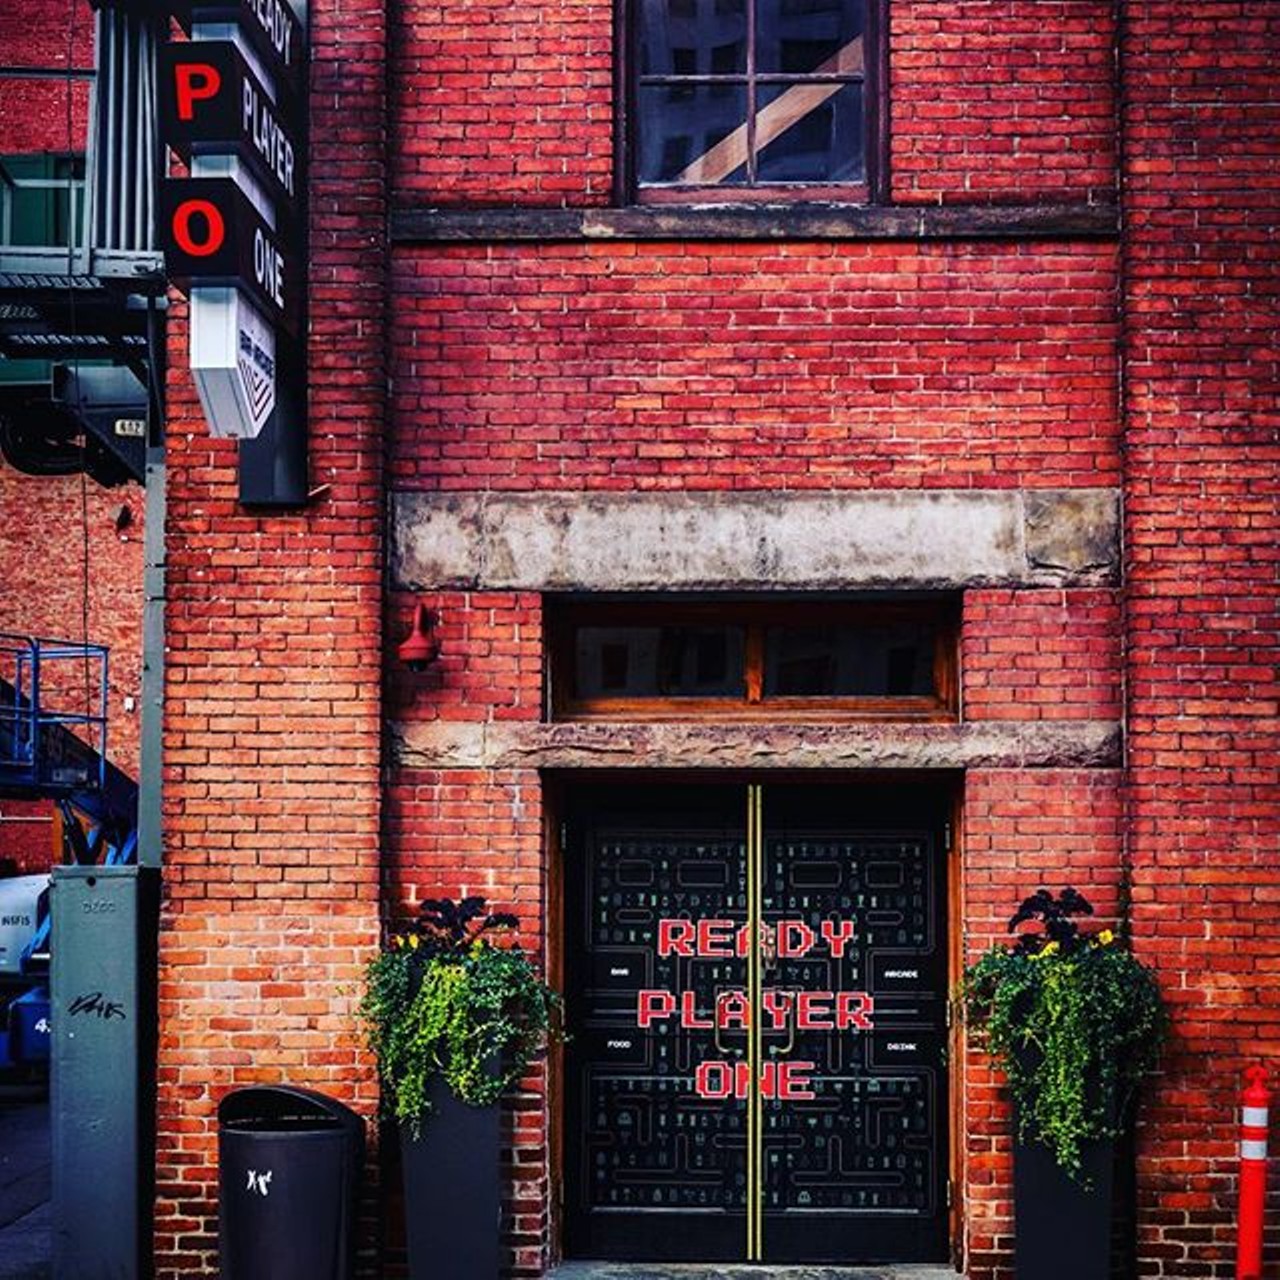 Ready Player One
407 E Fort St., Detroit; 313-395-3300
Ready Player One features the best arcade games from the 1980s and 1990s. This is a spot where you can remember the good times. 
Photo via Instagram user @rpodetroit